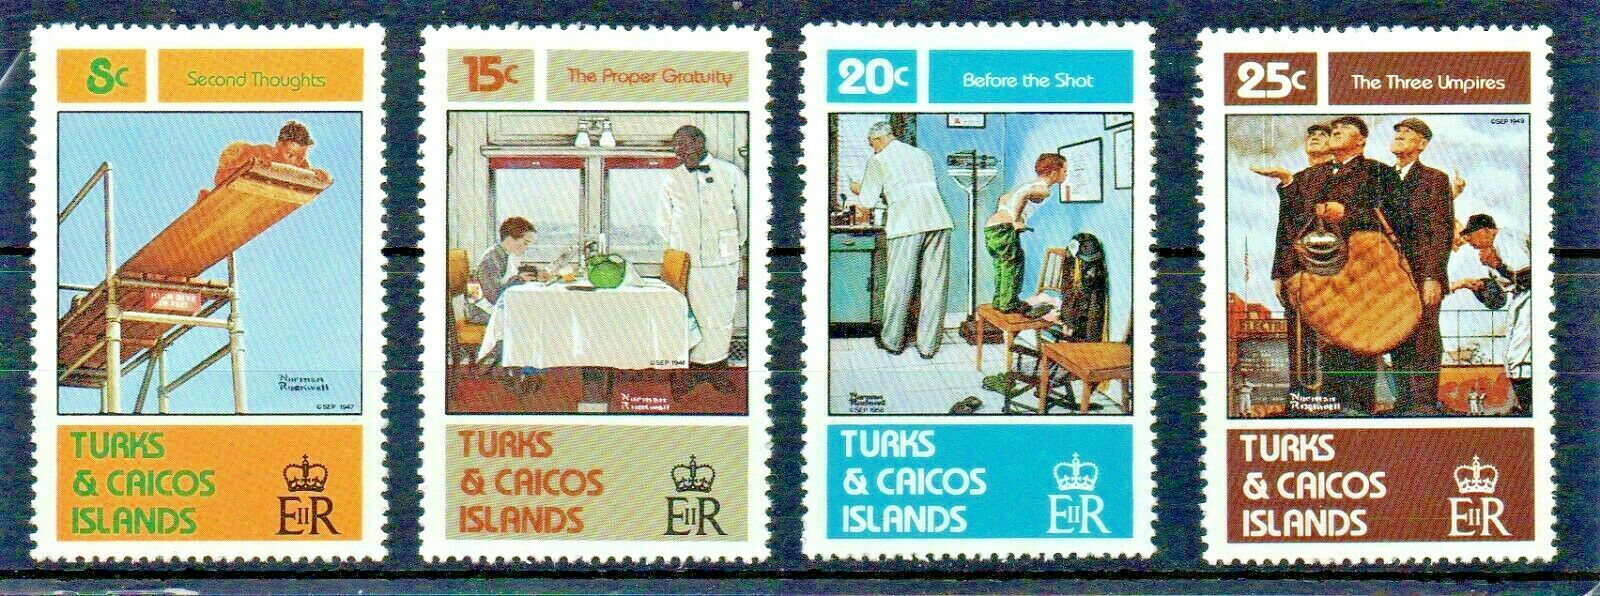 Norman Rockwell Set of 4 Famous Paintings on Mint NH Stamps Turks and Caicos CPL